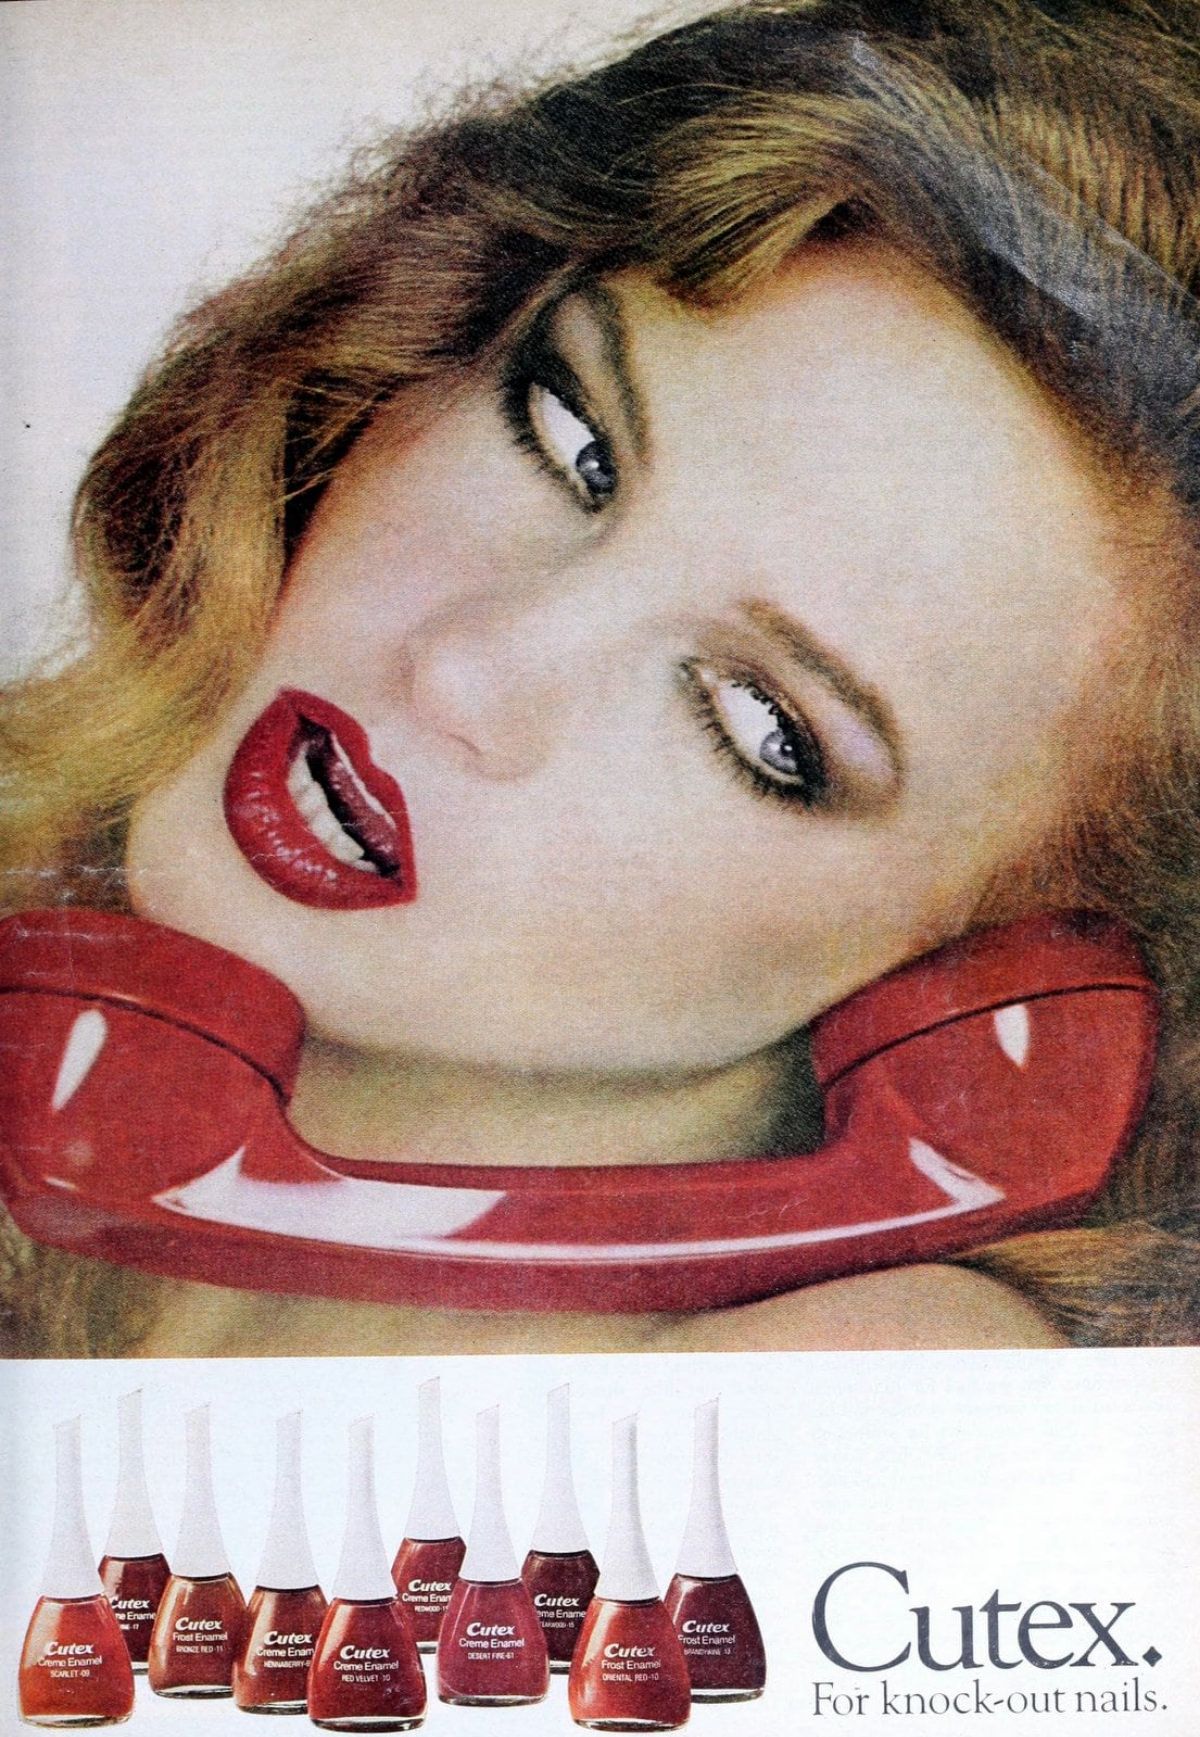 Beautiful Vintage Nail Polish Ads from the 1980s